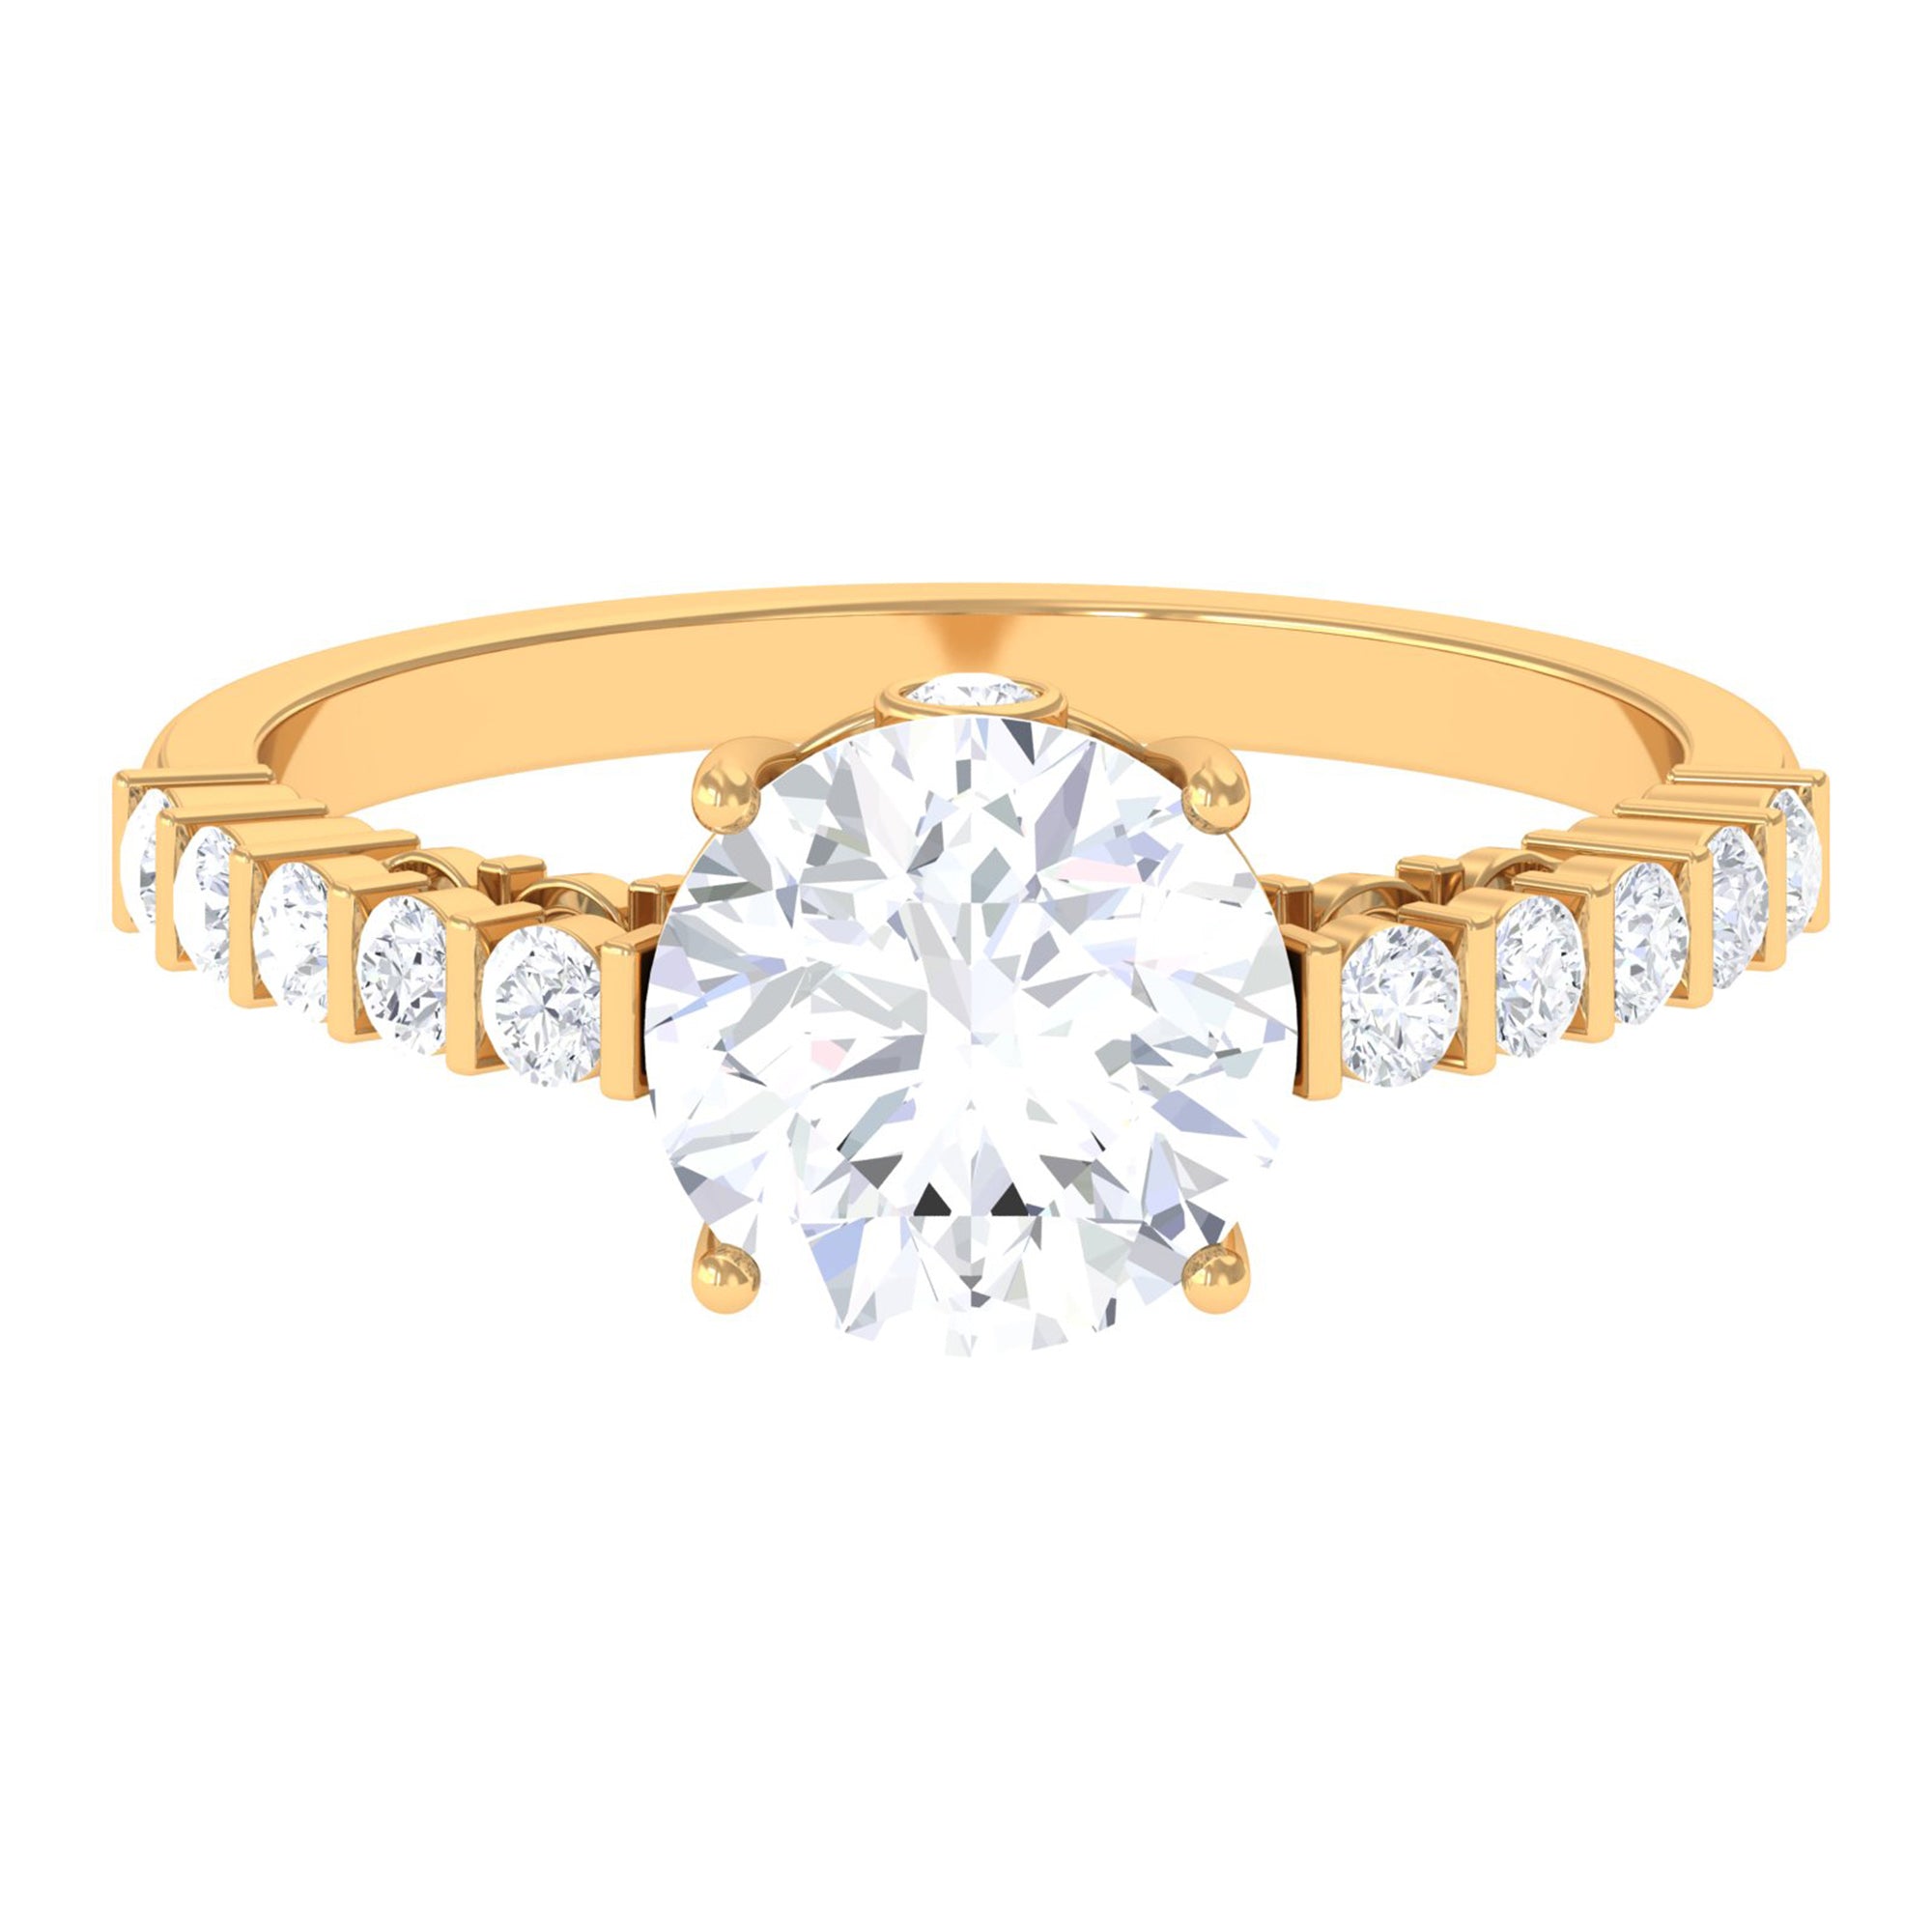 Solitaire Moissanite Engagement Ring with Side Stones Moissanite - ( D-VS1 ) - Color and Clarity - Rosec Jewels